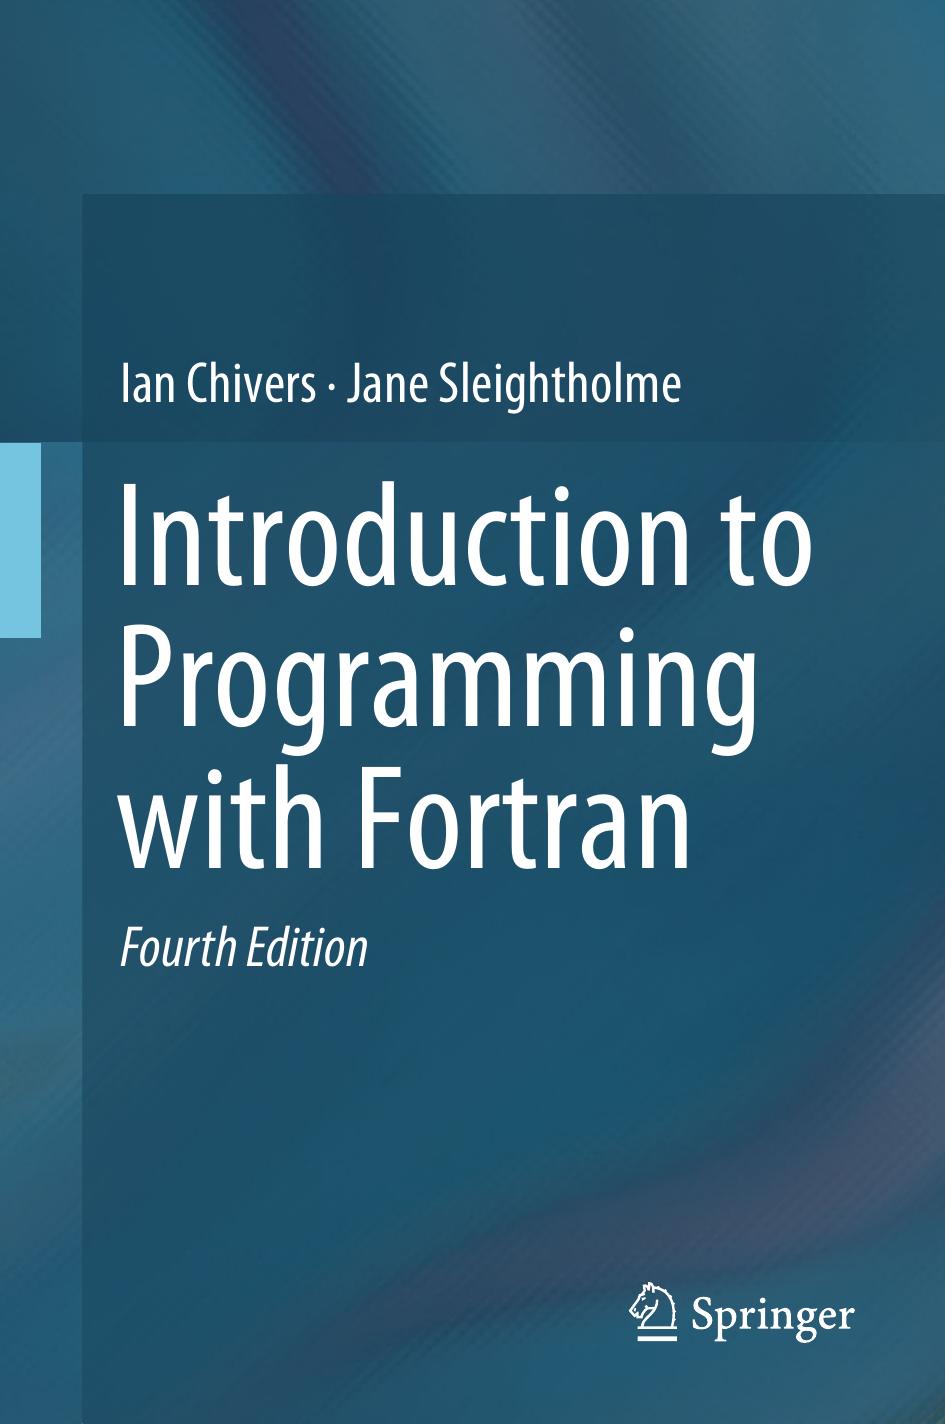 Introduction to Programming with Fortran by Ian Chivers & Jane Sleightholme